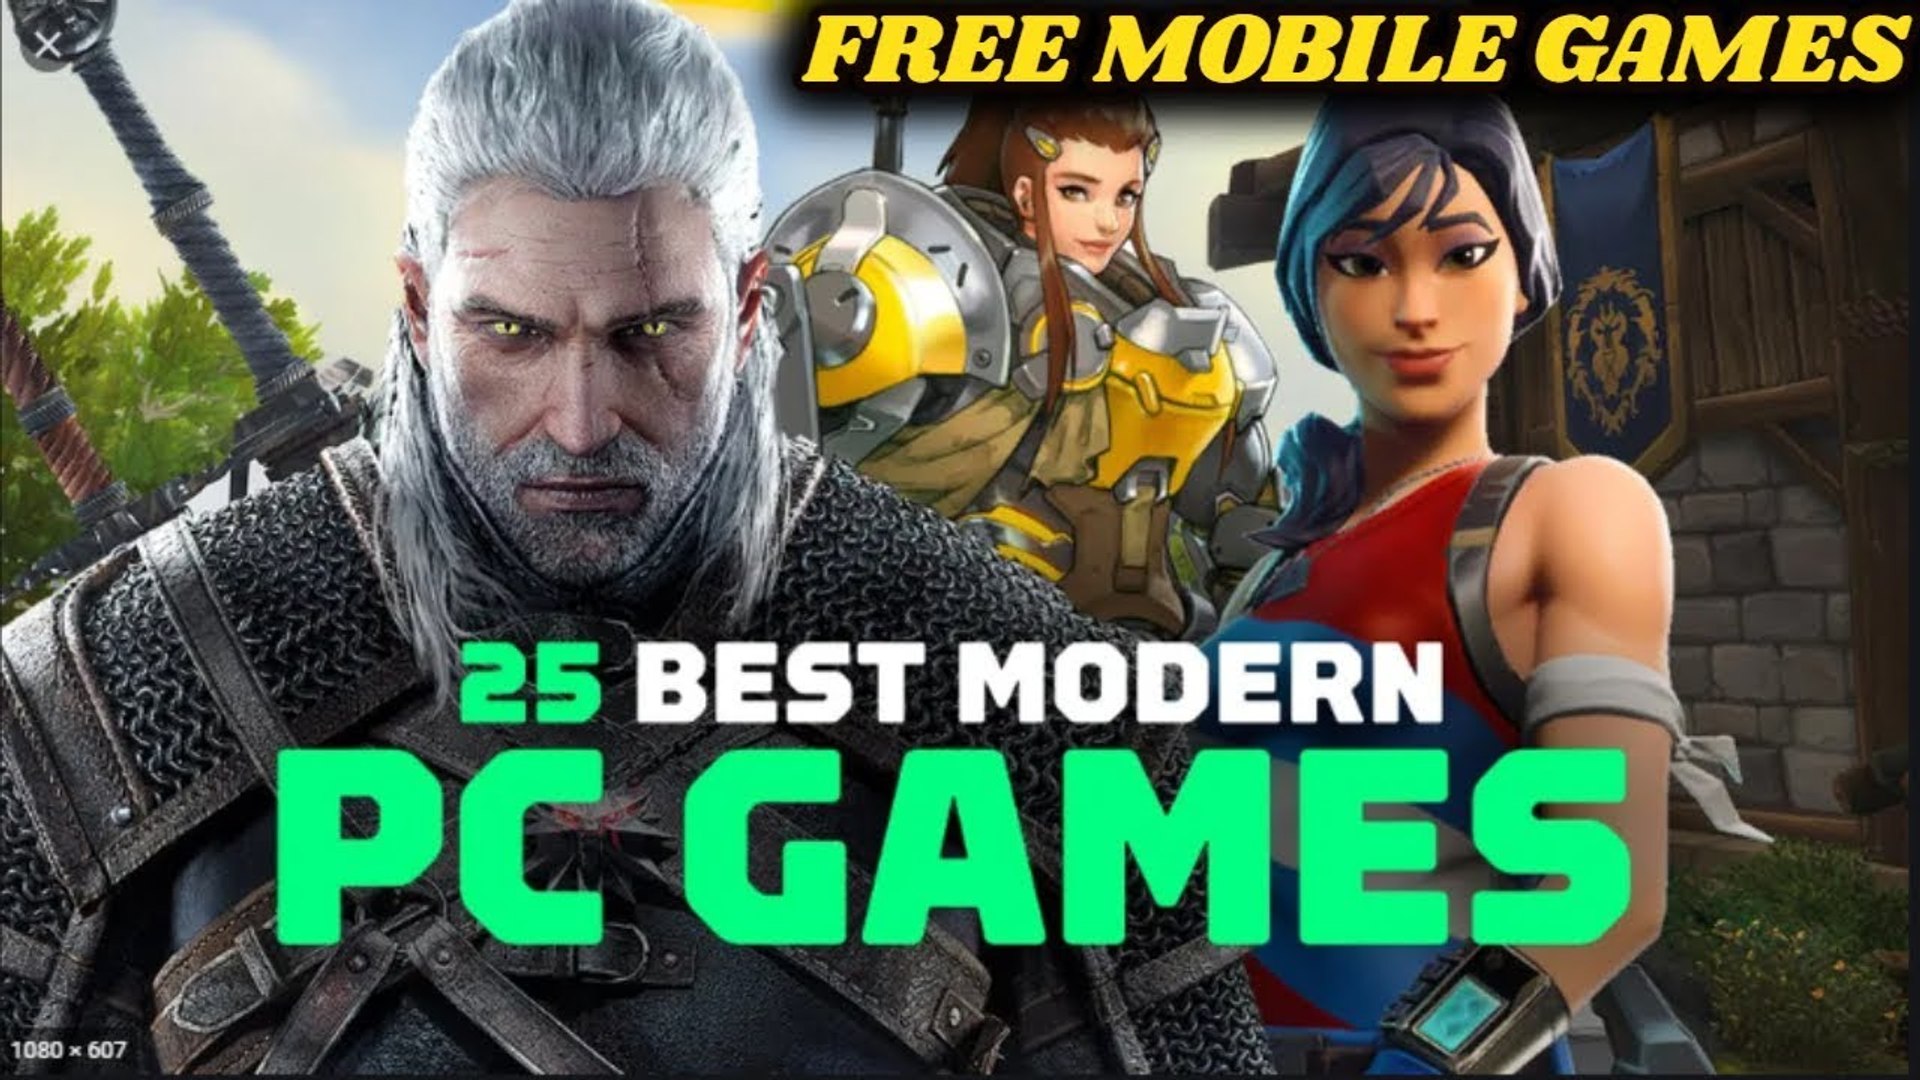 Finally! Top FREE Mobile Games [2020] - Android & iOS - video Dailymotion